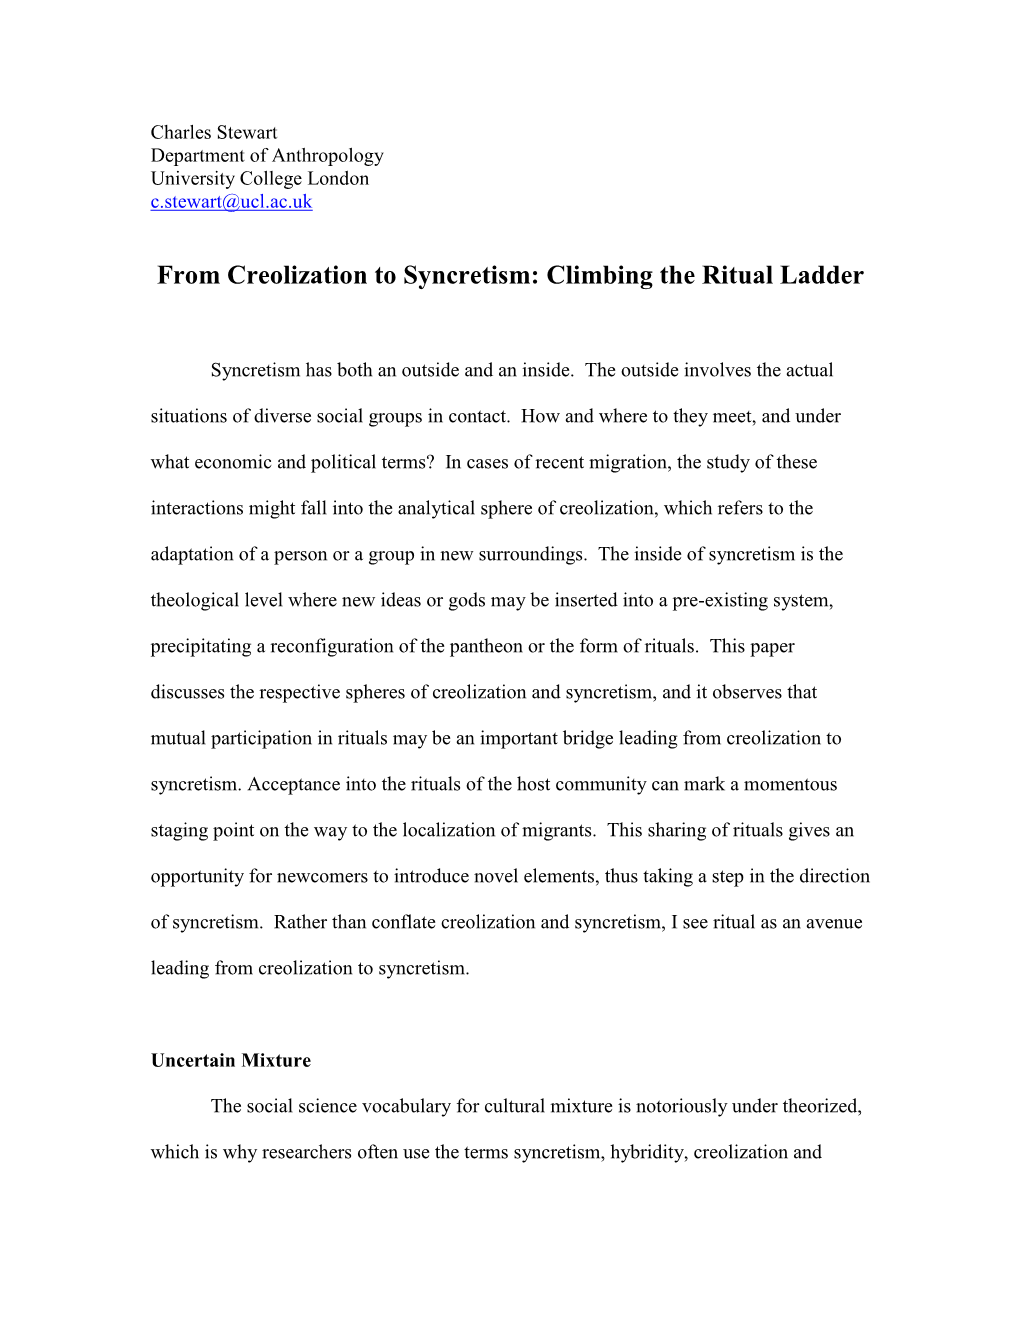 From Creolization to Syncretism: Climbing the Ritual Ladder